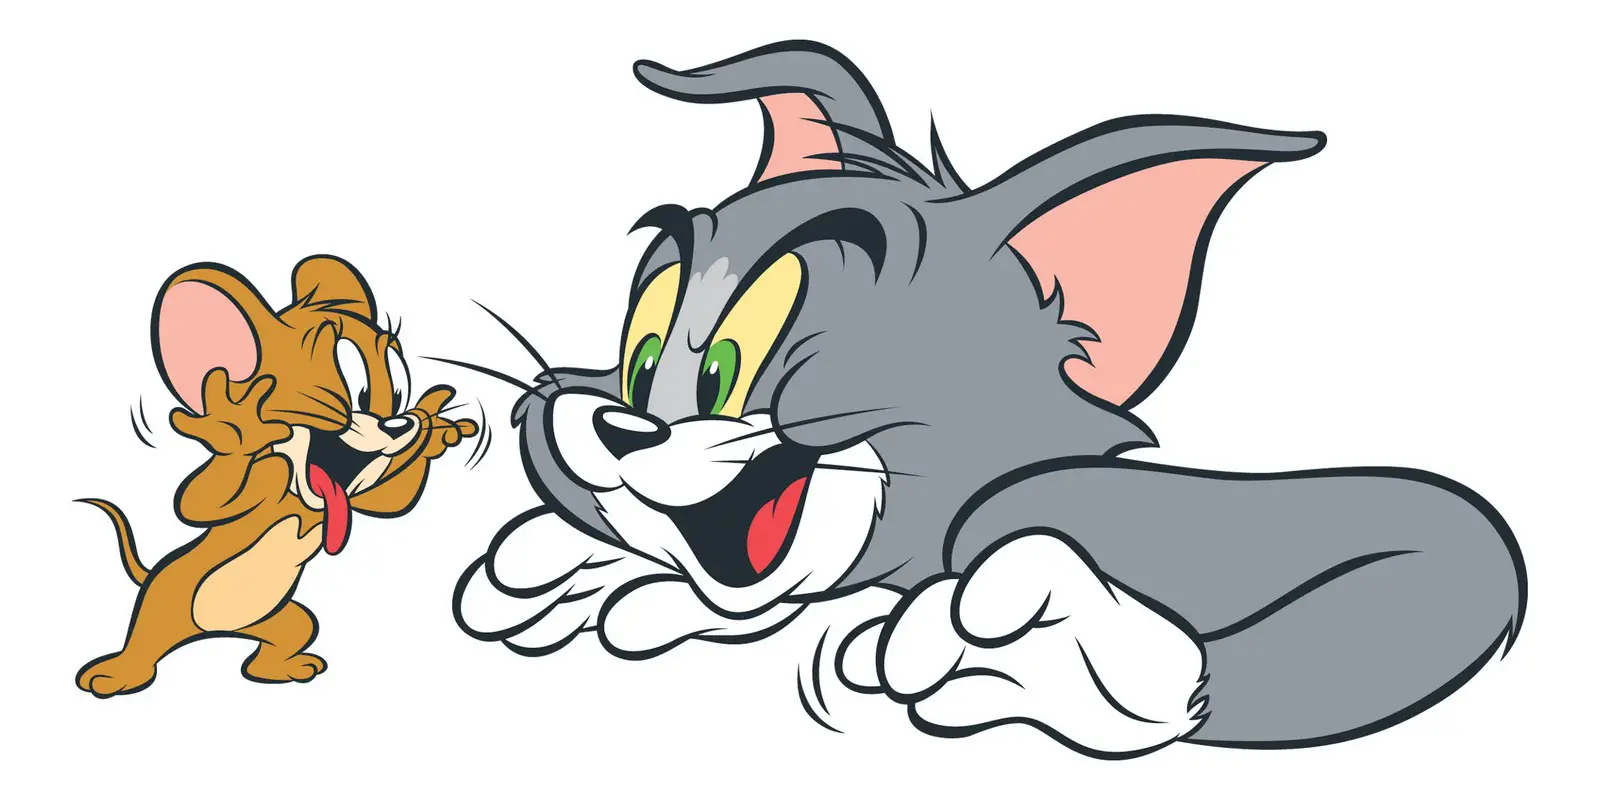 Tom-and-Jerry-Cartoon-Wallpapers